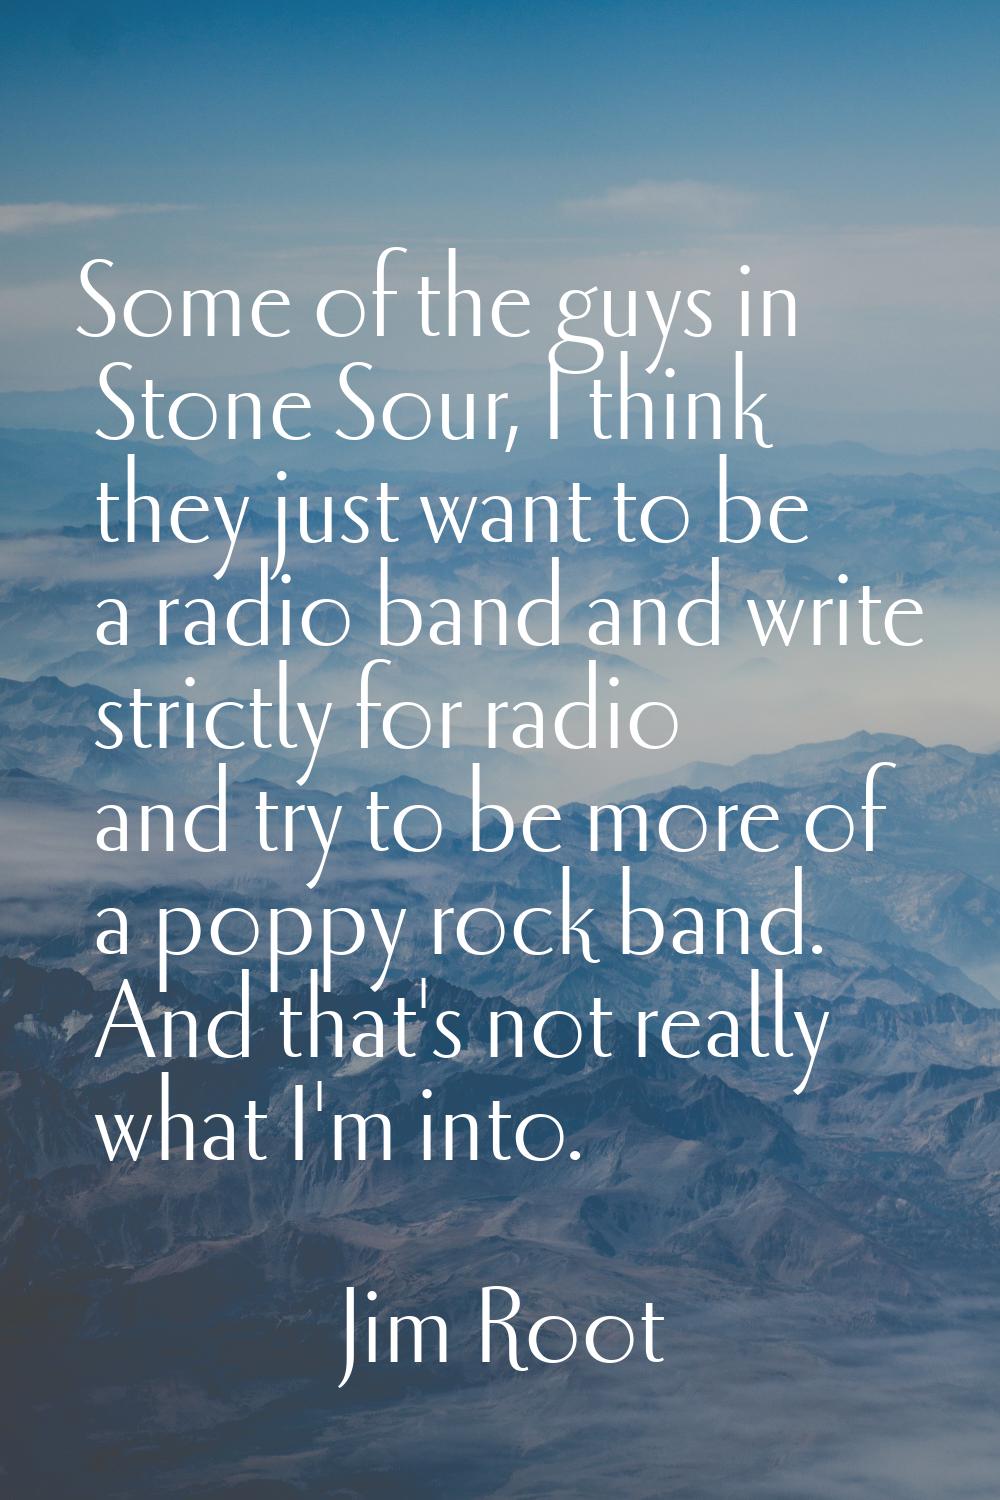 Some of the guys in Stone Sour, I think they just want to be a radio band and write strictly for ra